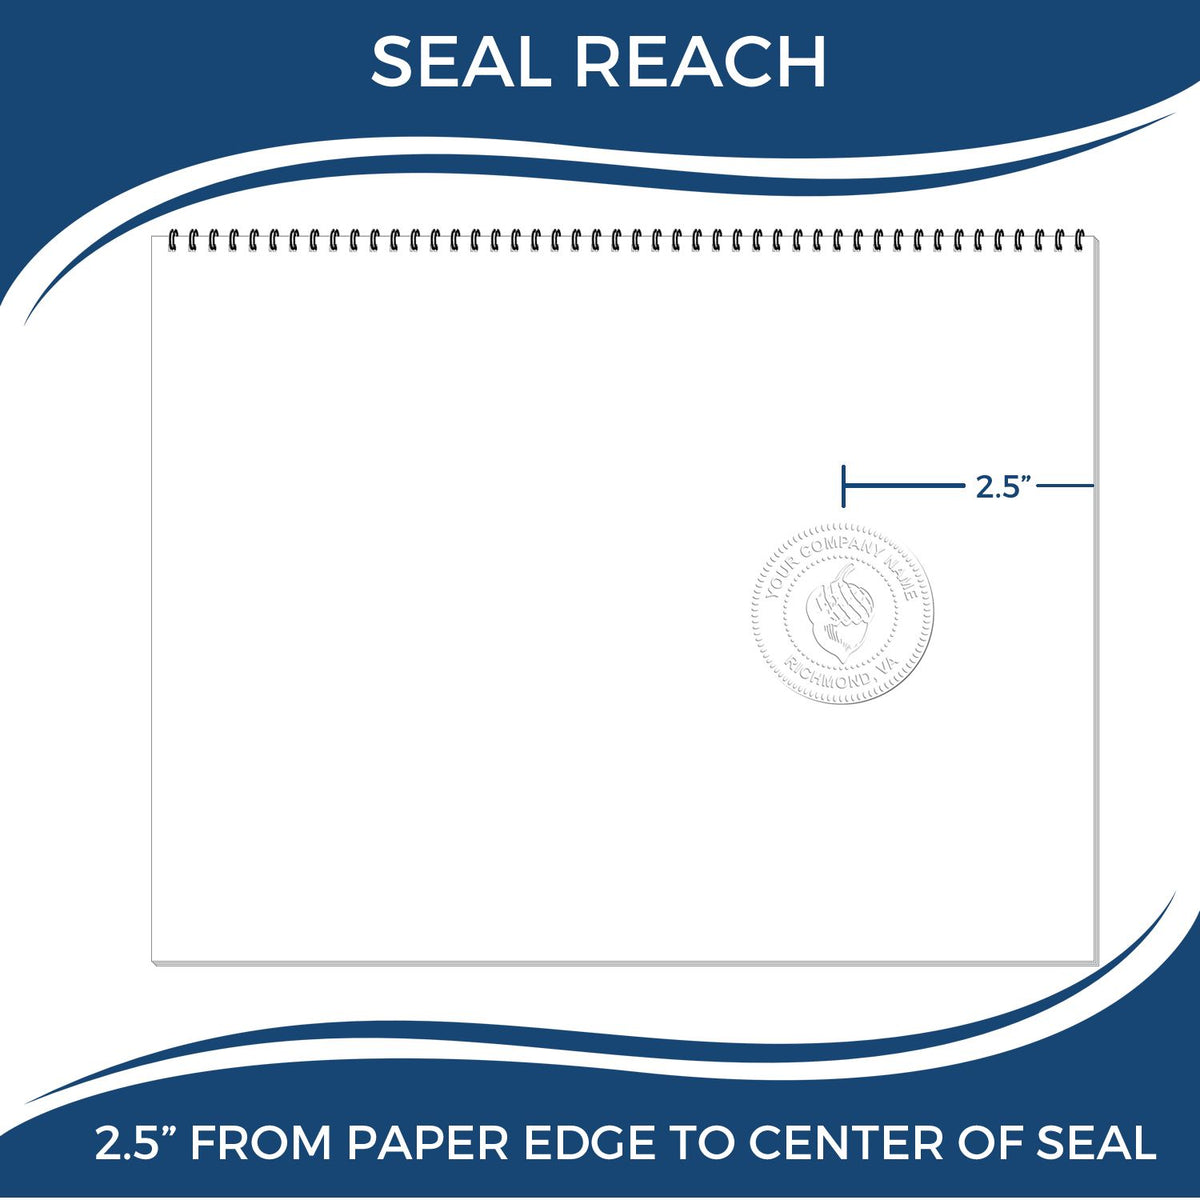 An infographic showing the seal reach which is represented by a ruler and a miniature seal image of the Heavy Duty Cast Iron Alaska Architect Embosser